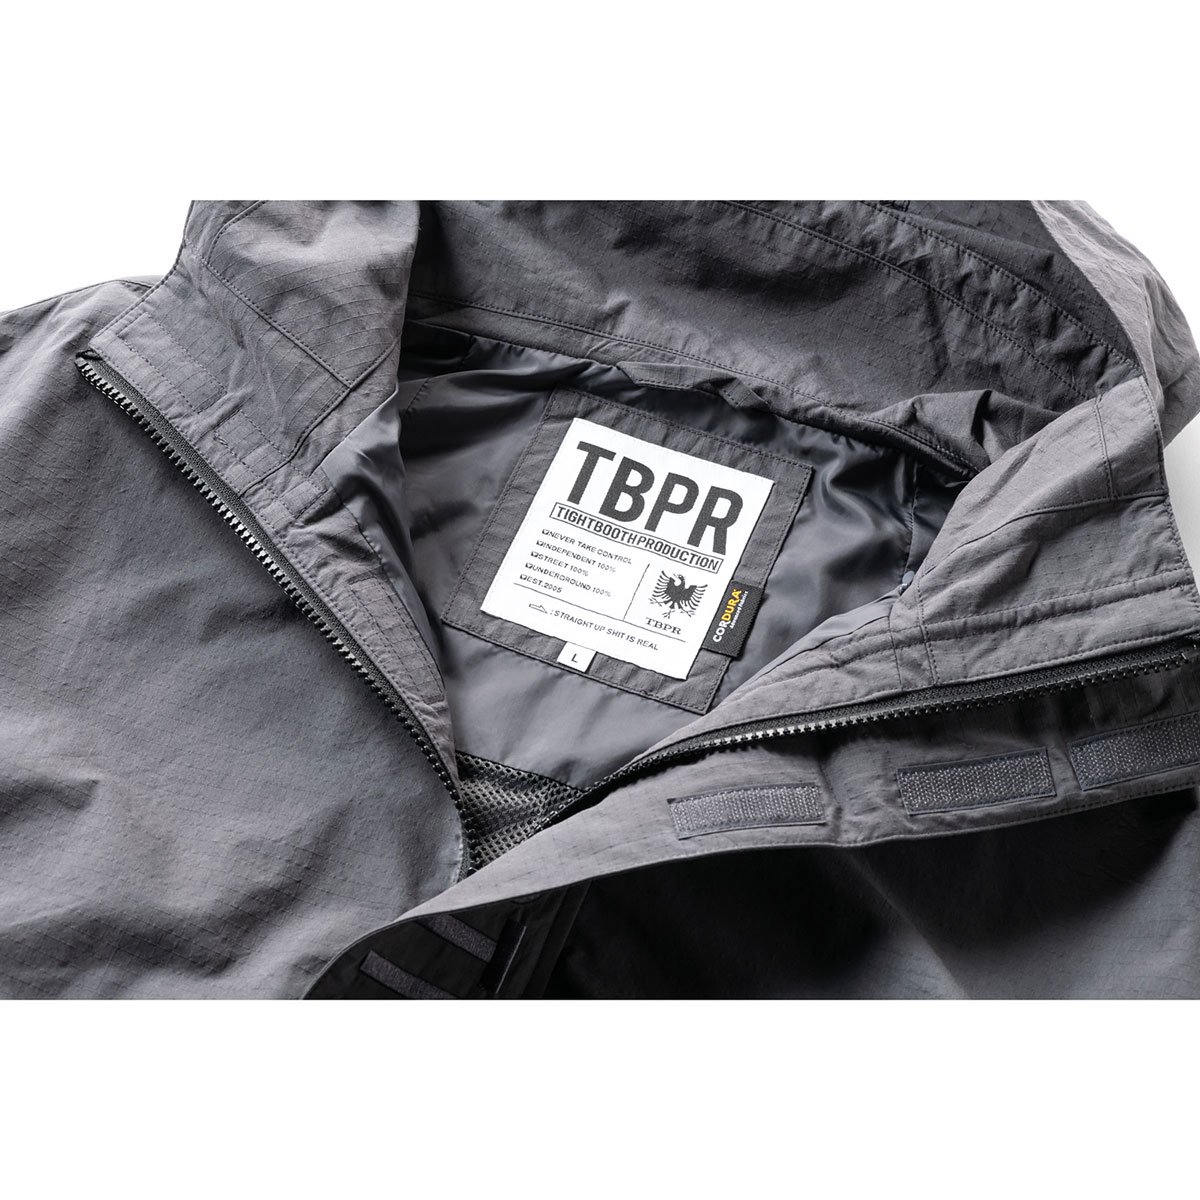 tightbooth RIPSTOP TACTICAL JACKET L vineentgroup.com